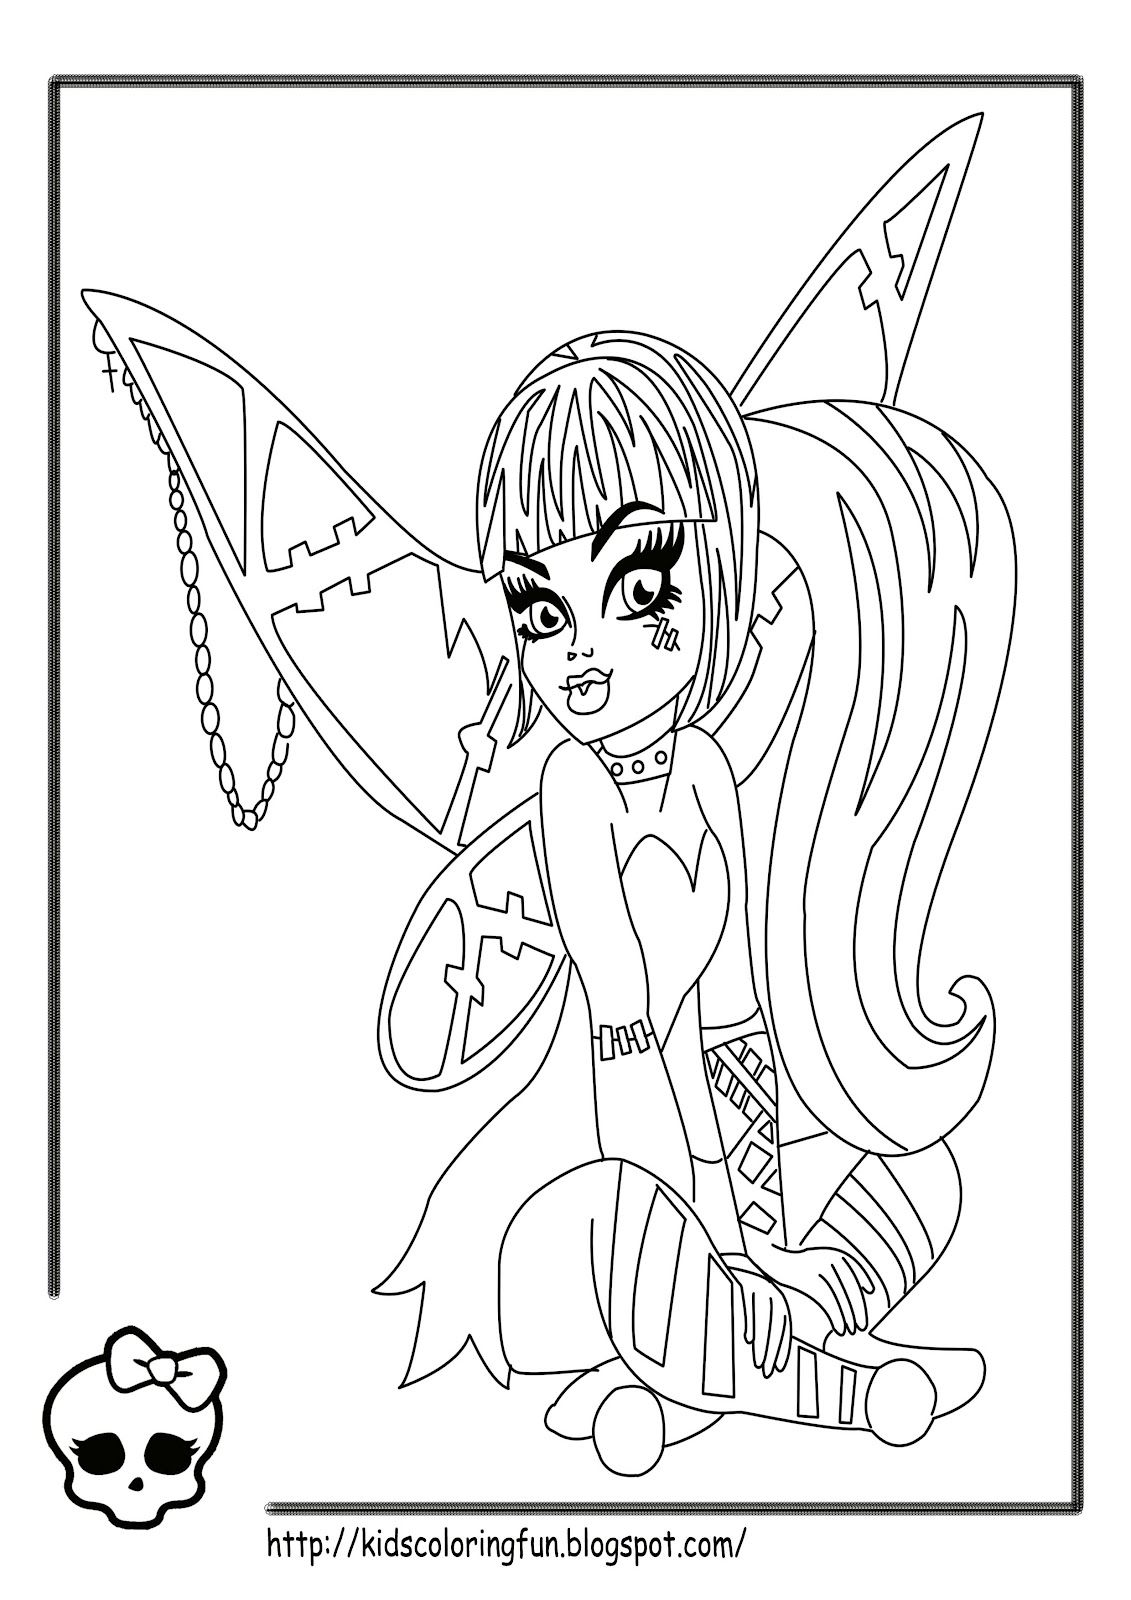  coloring howleen lagoona lagoona coloring abbey coloring monster high title=